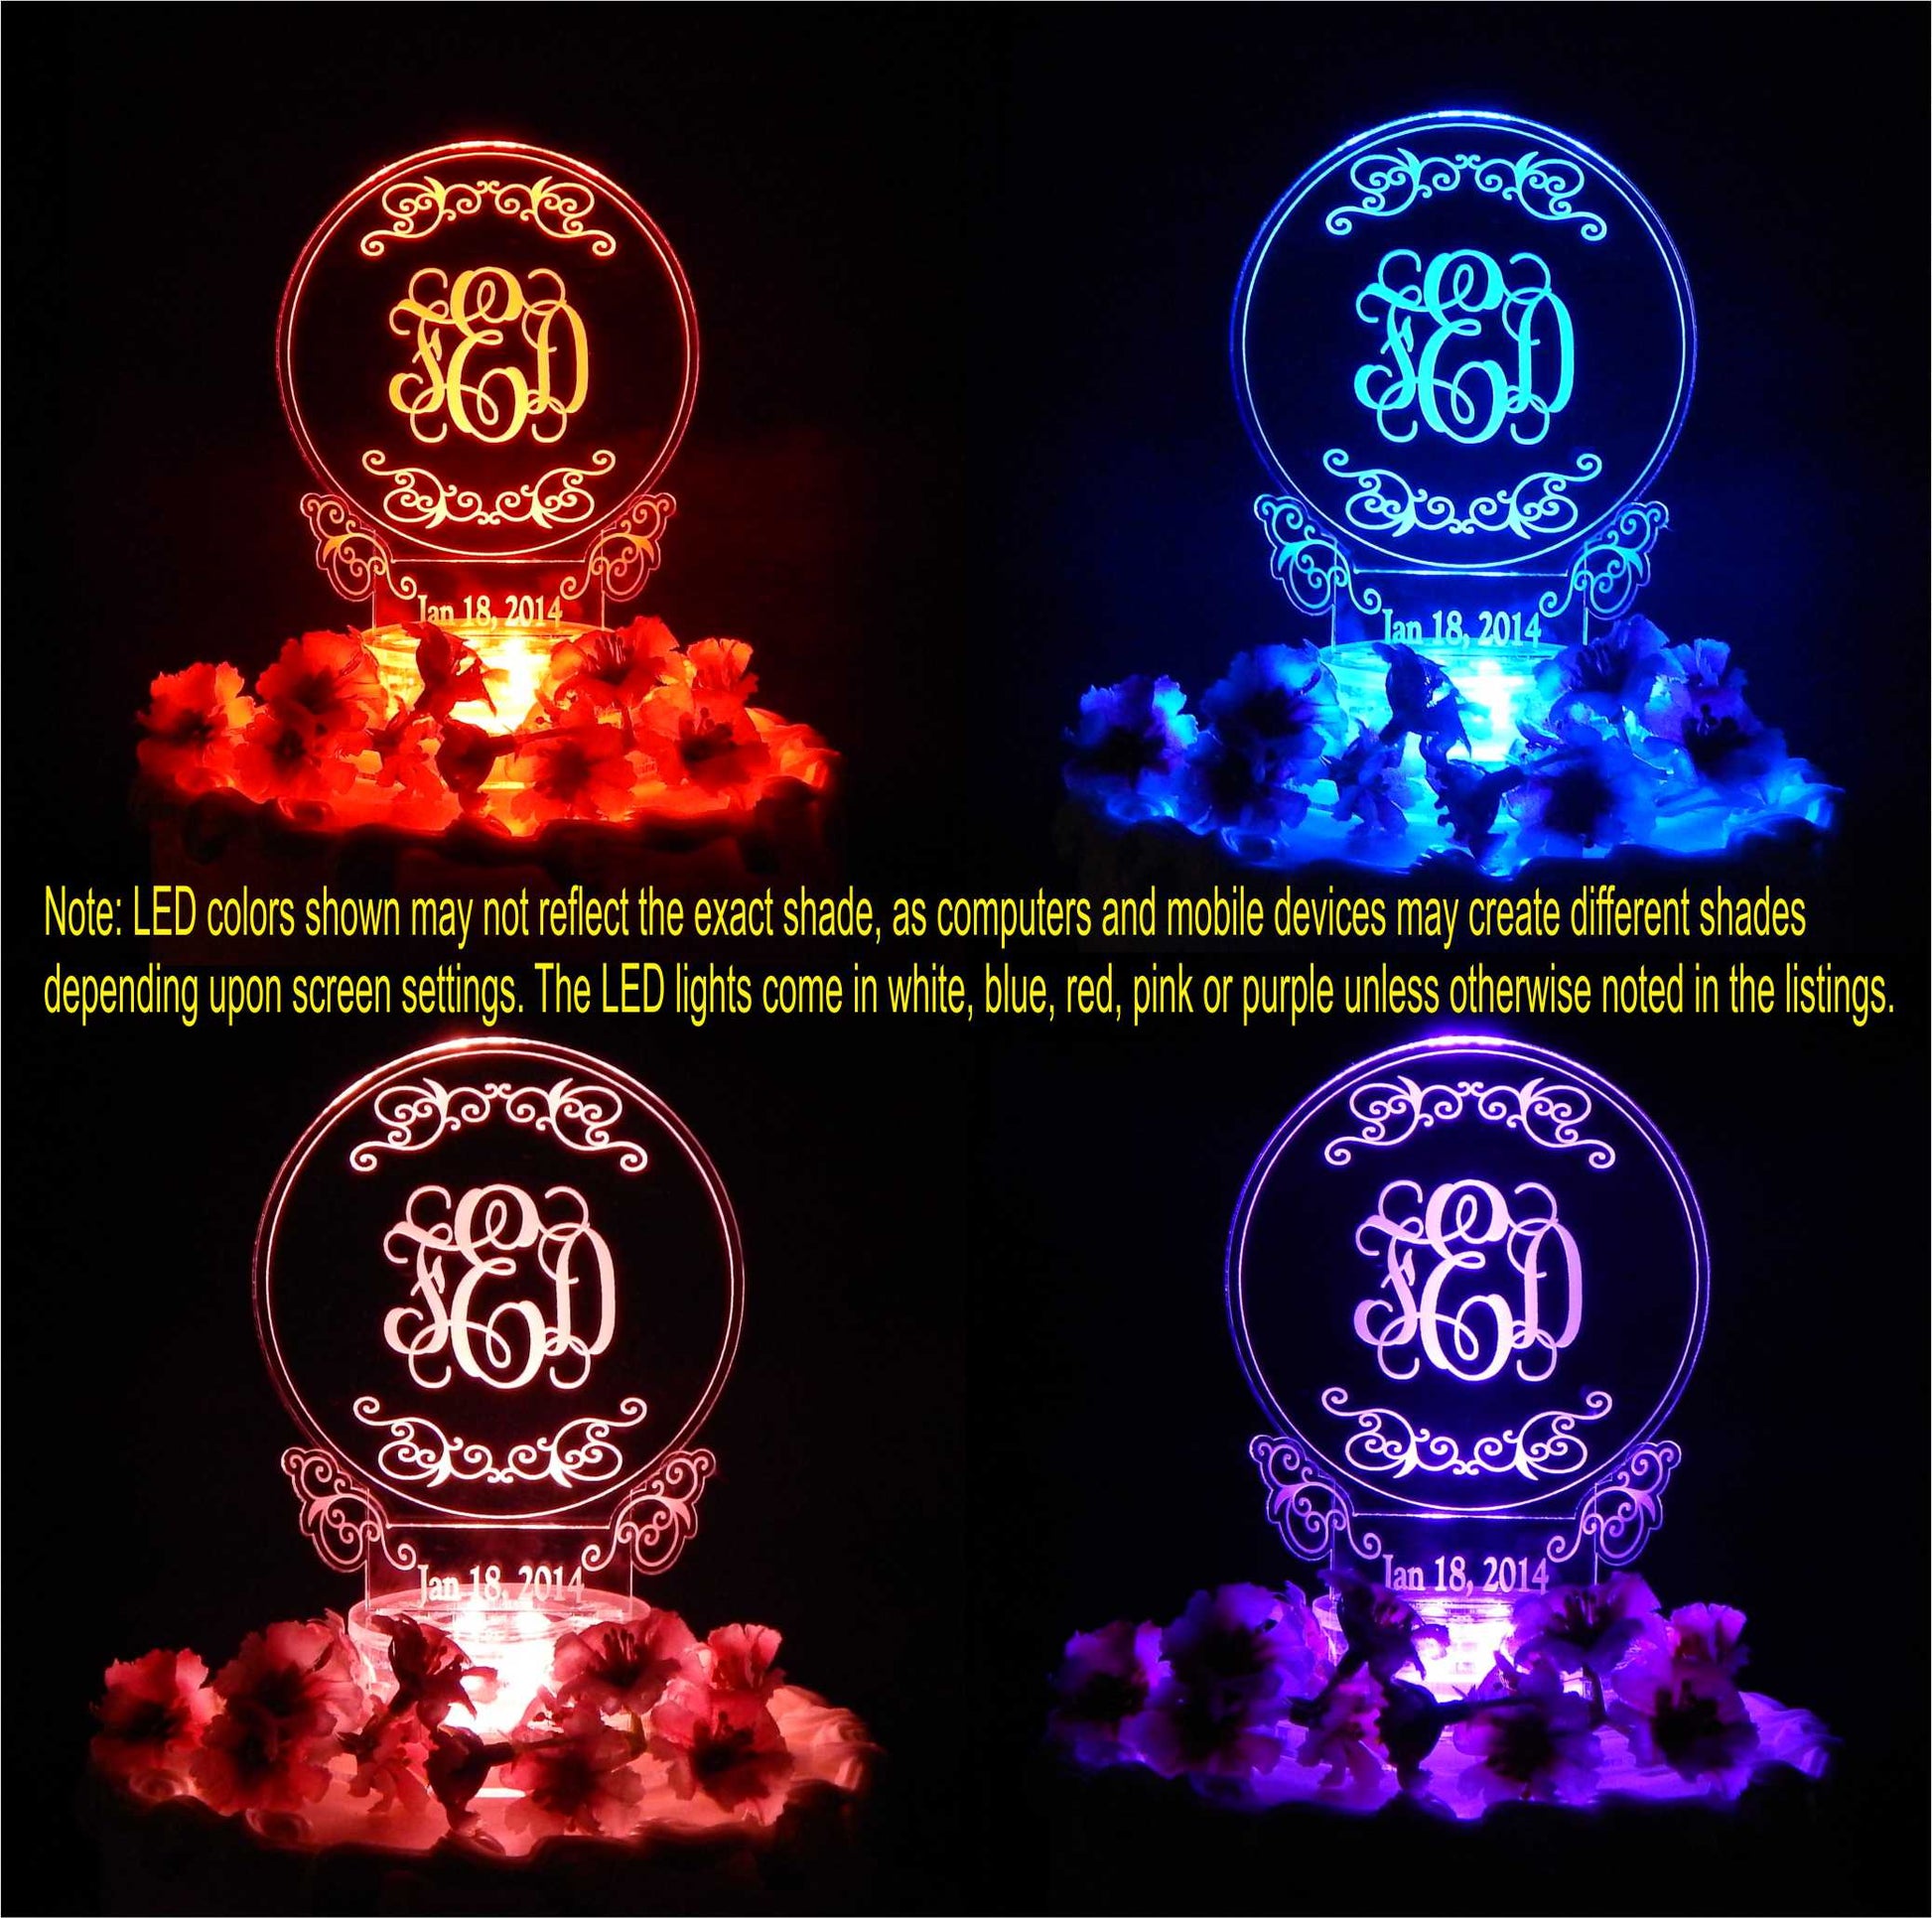 color views of a round acrylic cake topper showing a monogram and date, shown in red, blue, pink and purple lighting